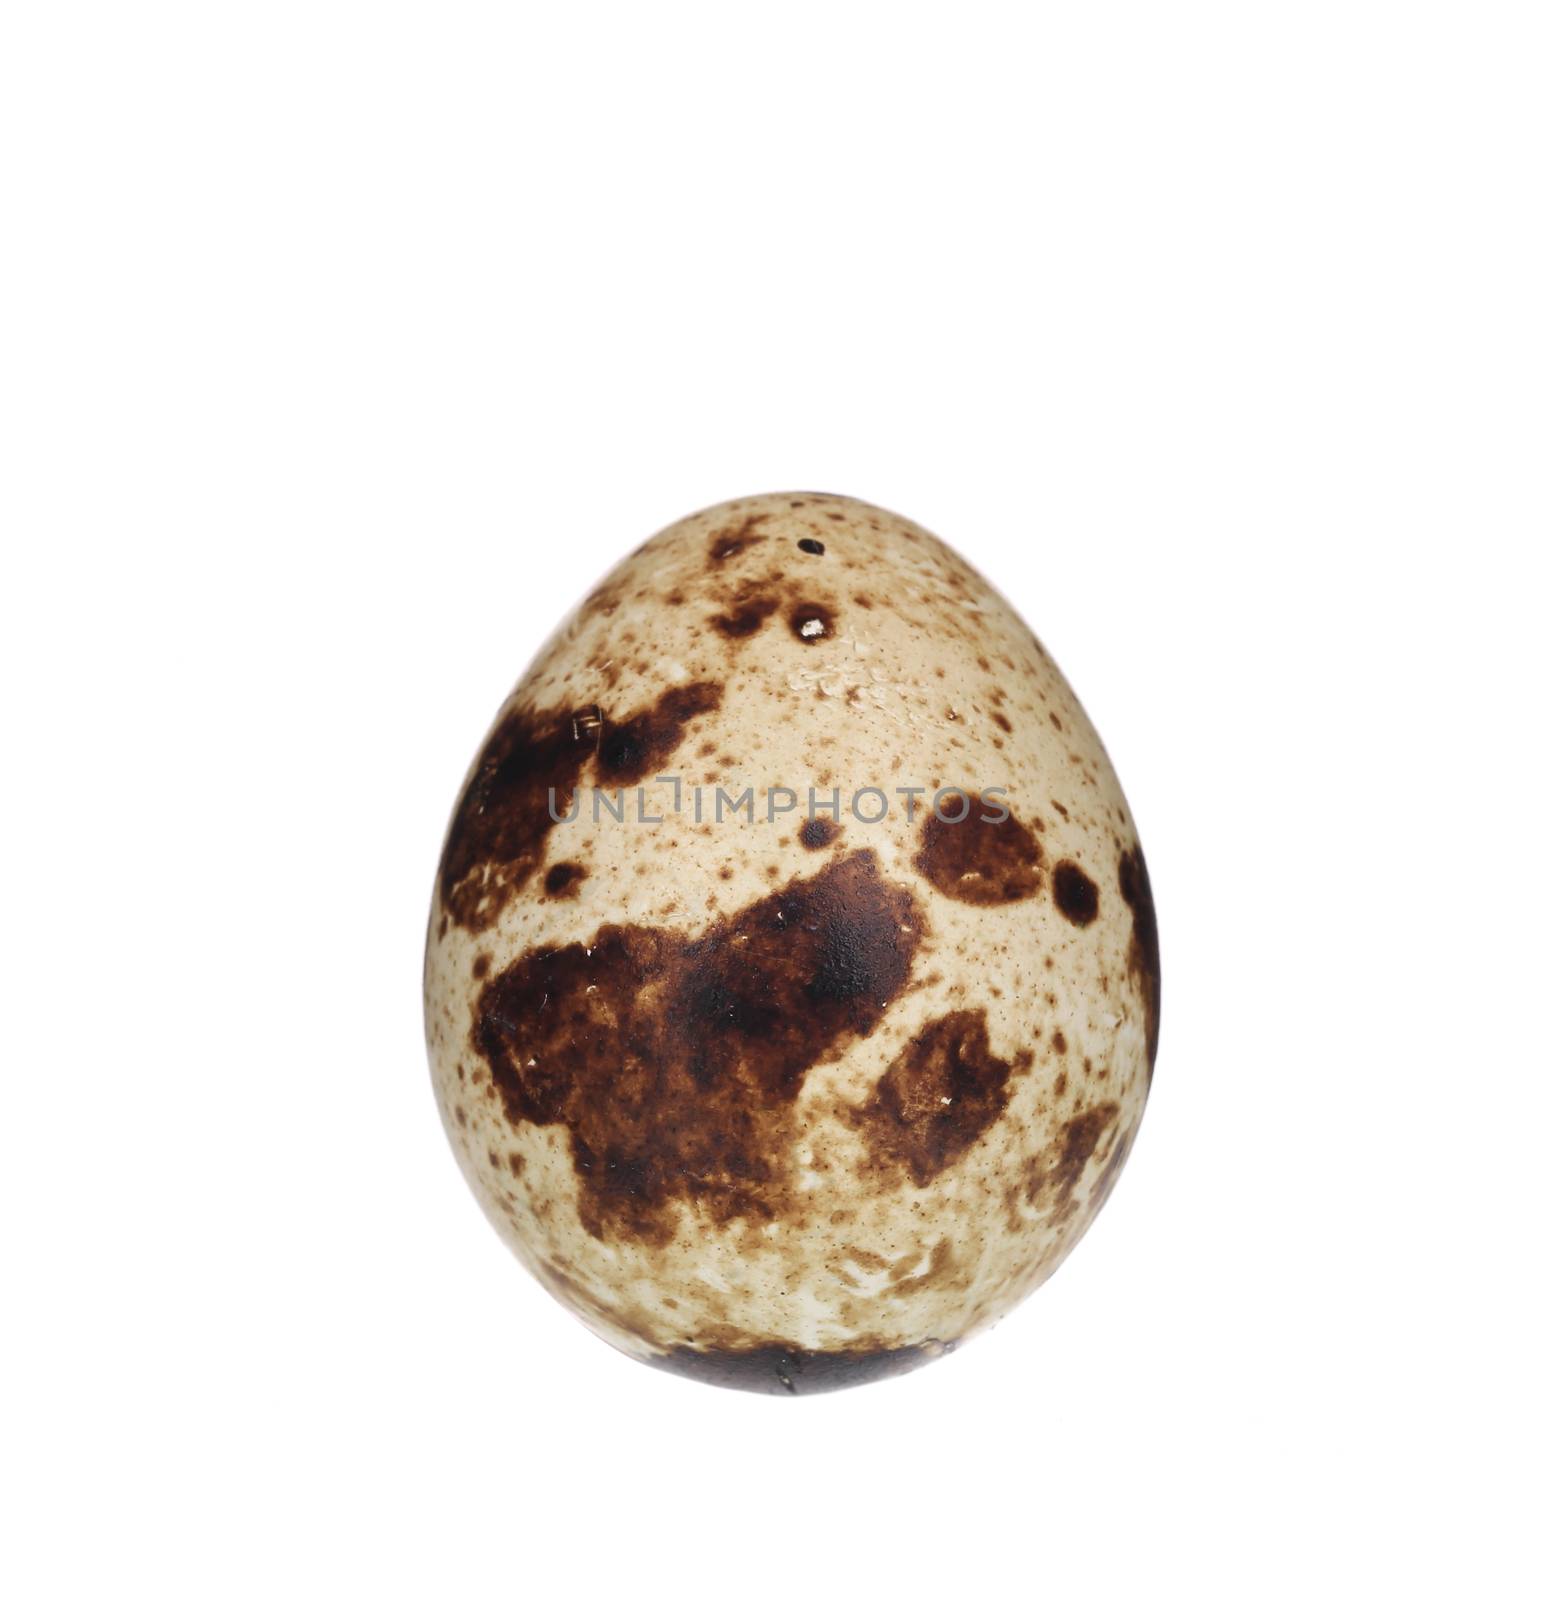 Raw quail egg. Isolated on a white background.